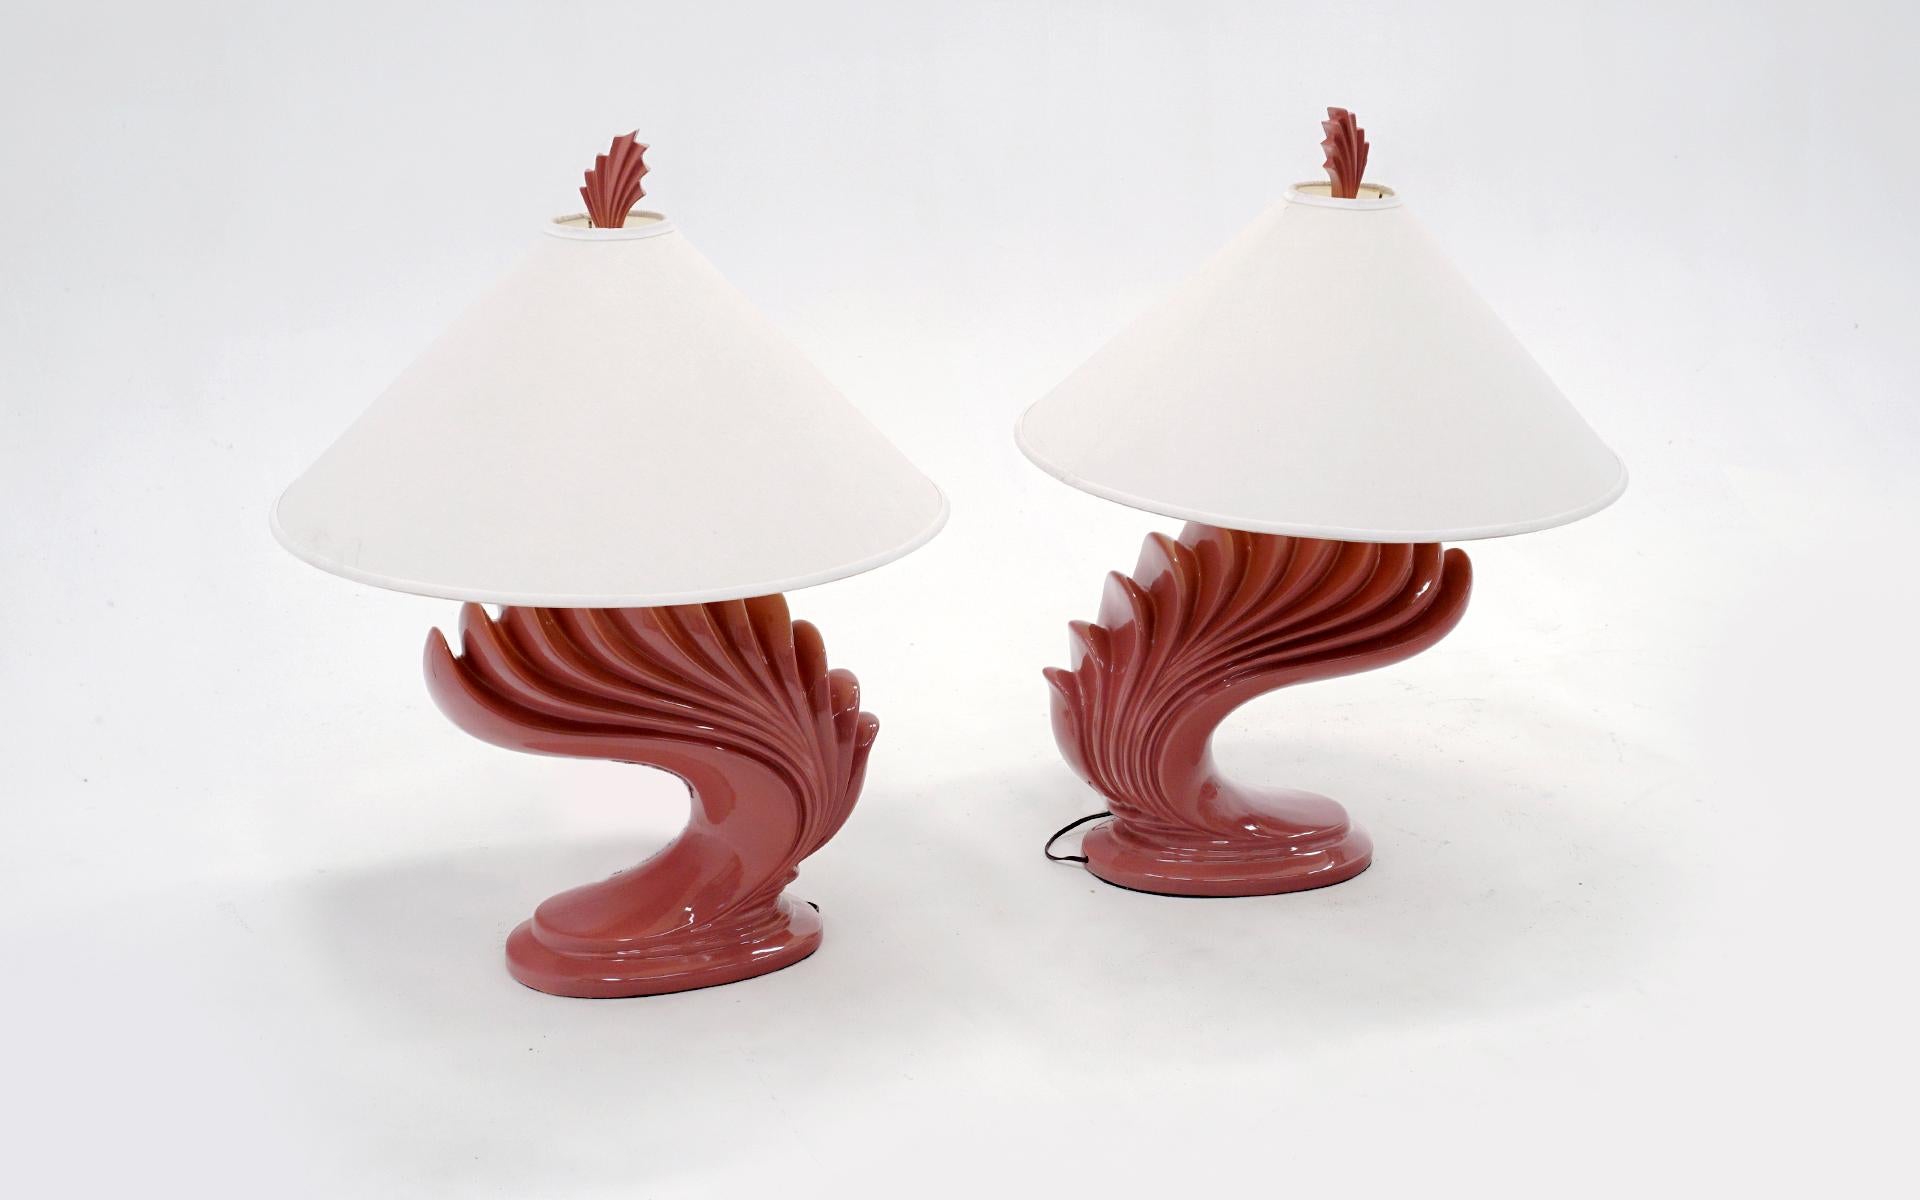 Large striking pair of ceramic table lamps with the original matching finials and original lamps shades. Coral / salmon / dark pink in color. Both wired for American outlets and in working condition. Very few if any signs of use.